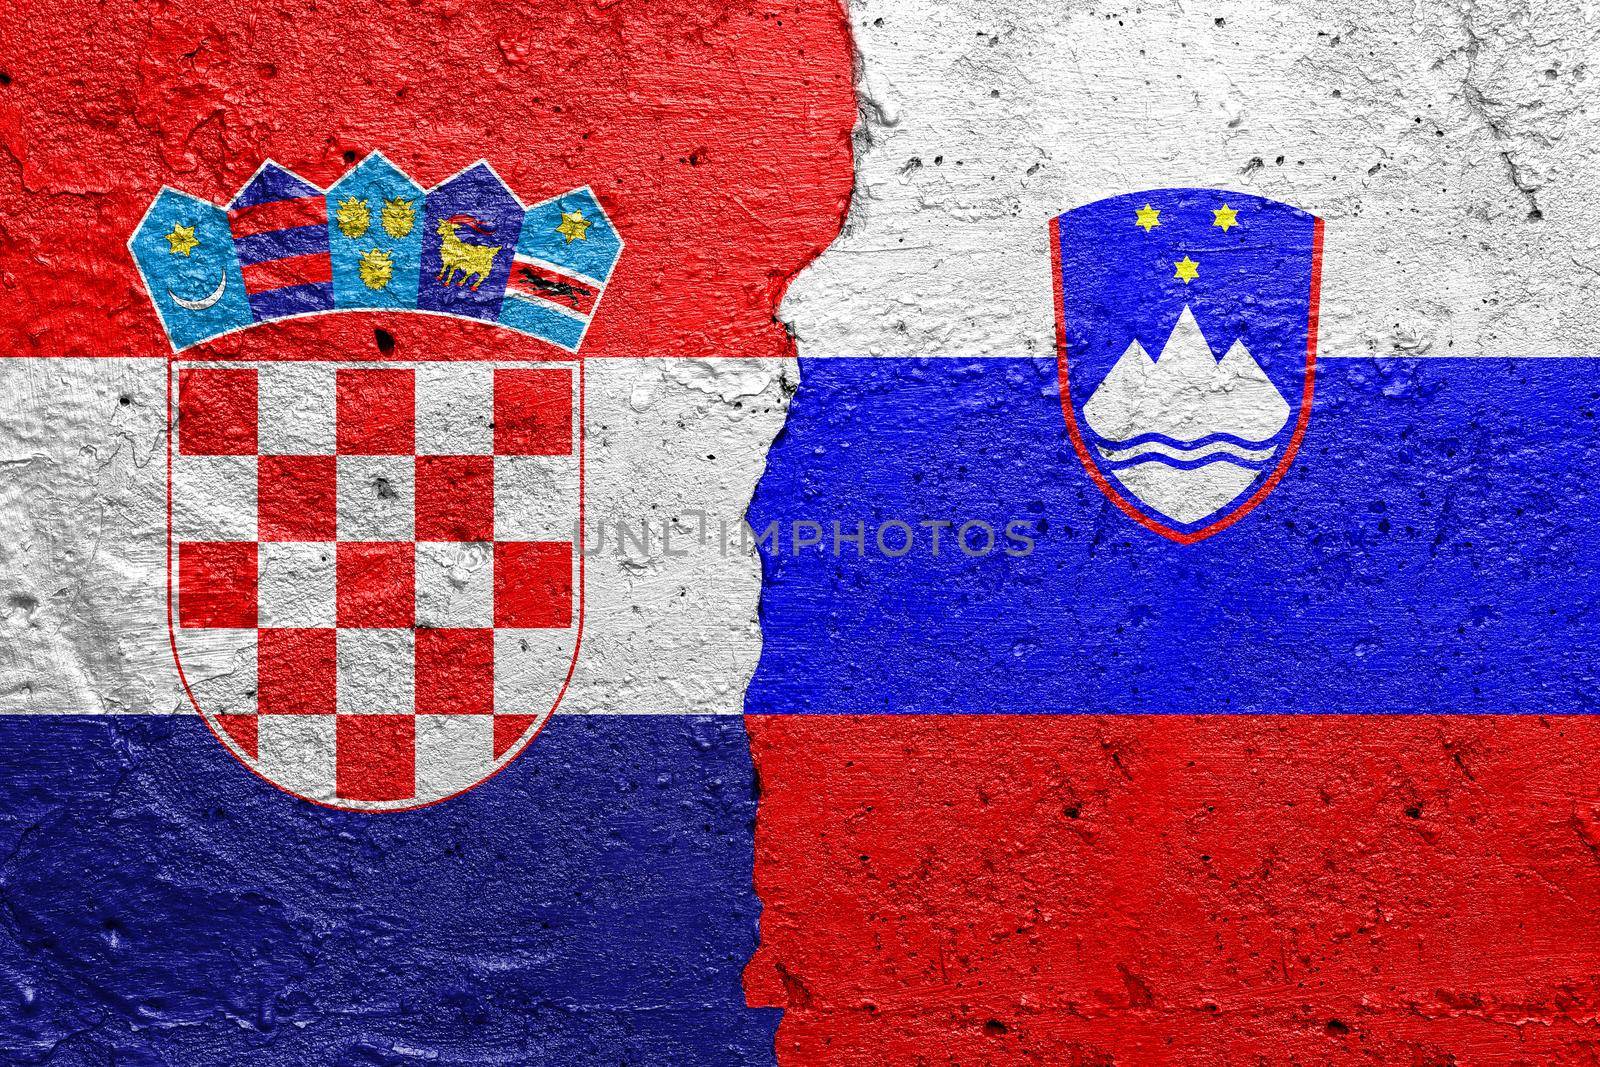 Croatia and Slovenia - Cracked concrete wall painted with a Croatian flag on the left and a Slovenian flag on the right stock photo by adamr